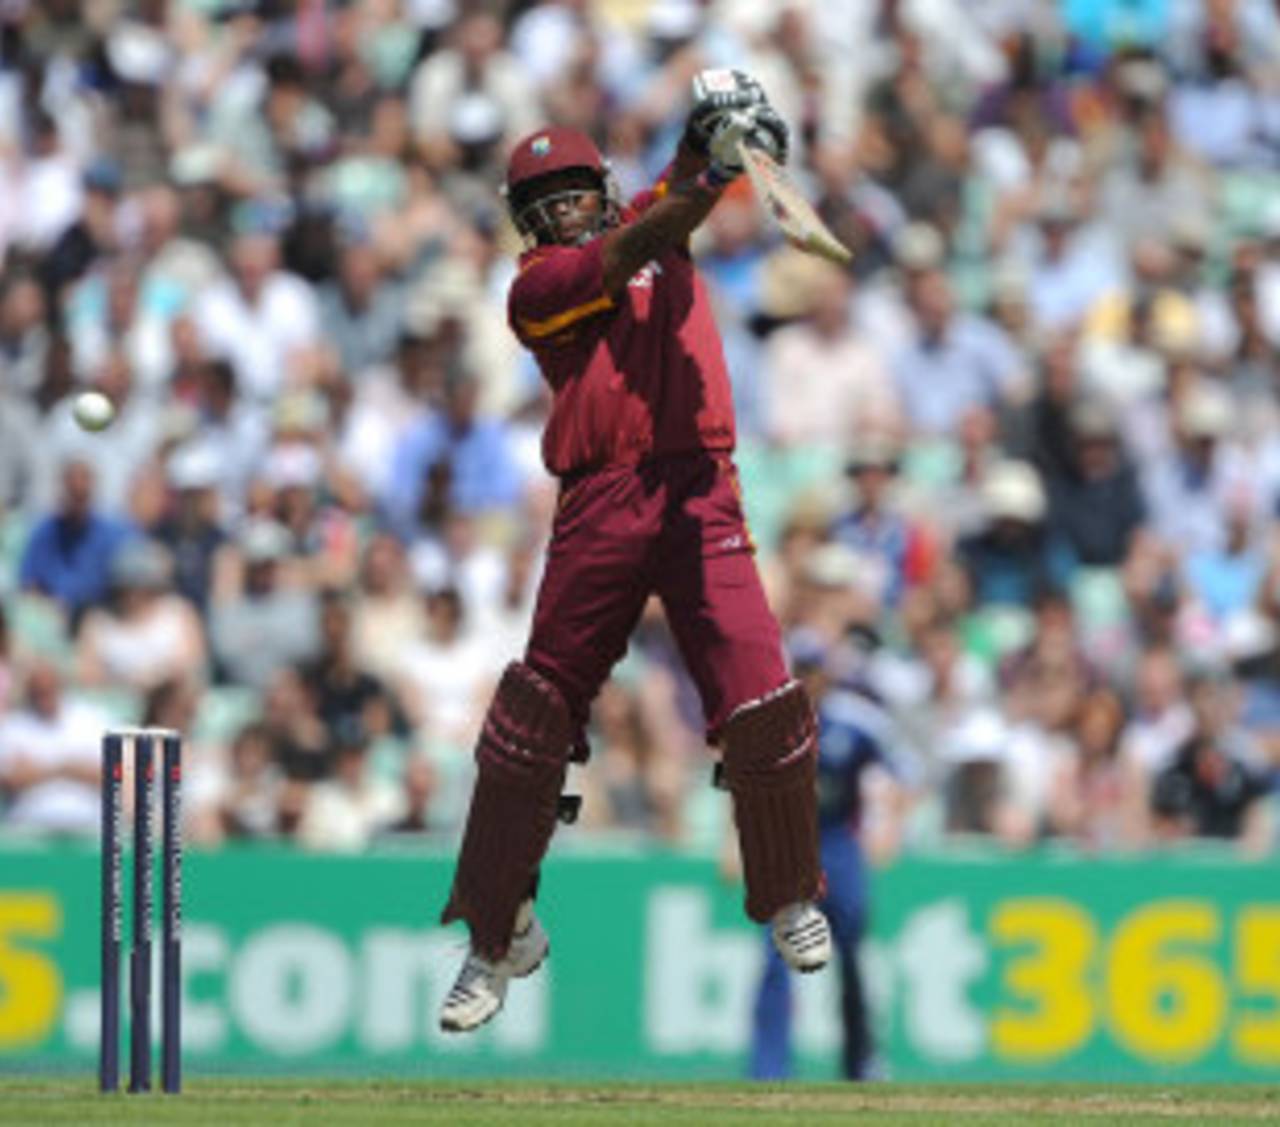 Dwayne Bravo is off his feet to play into the off side, England v West Indies, 2nd ODI, The Oval, June 19, 2012